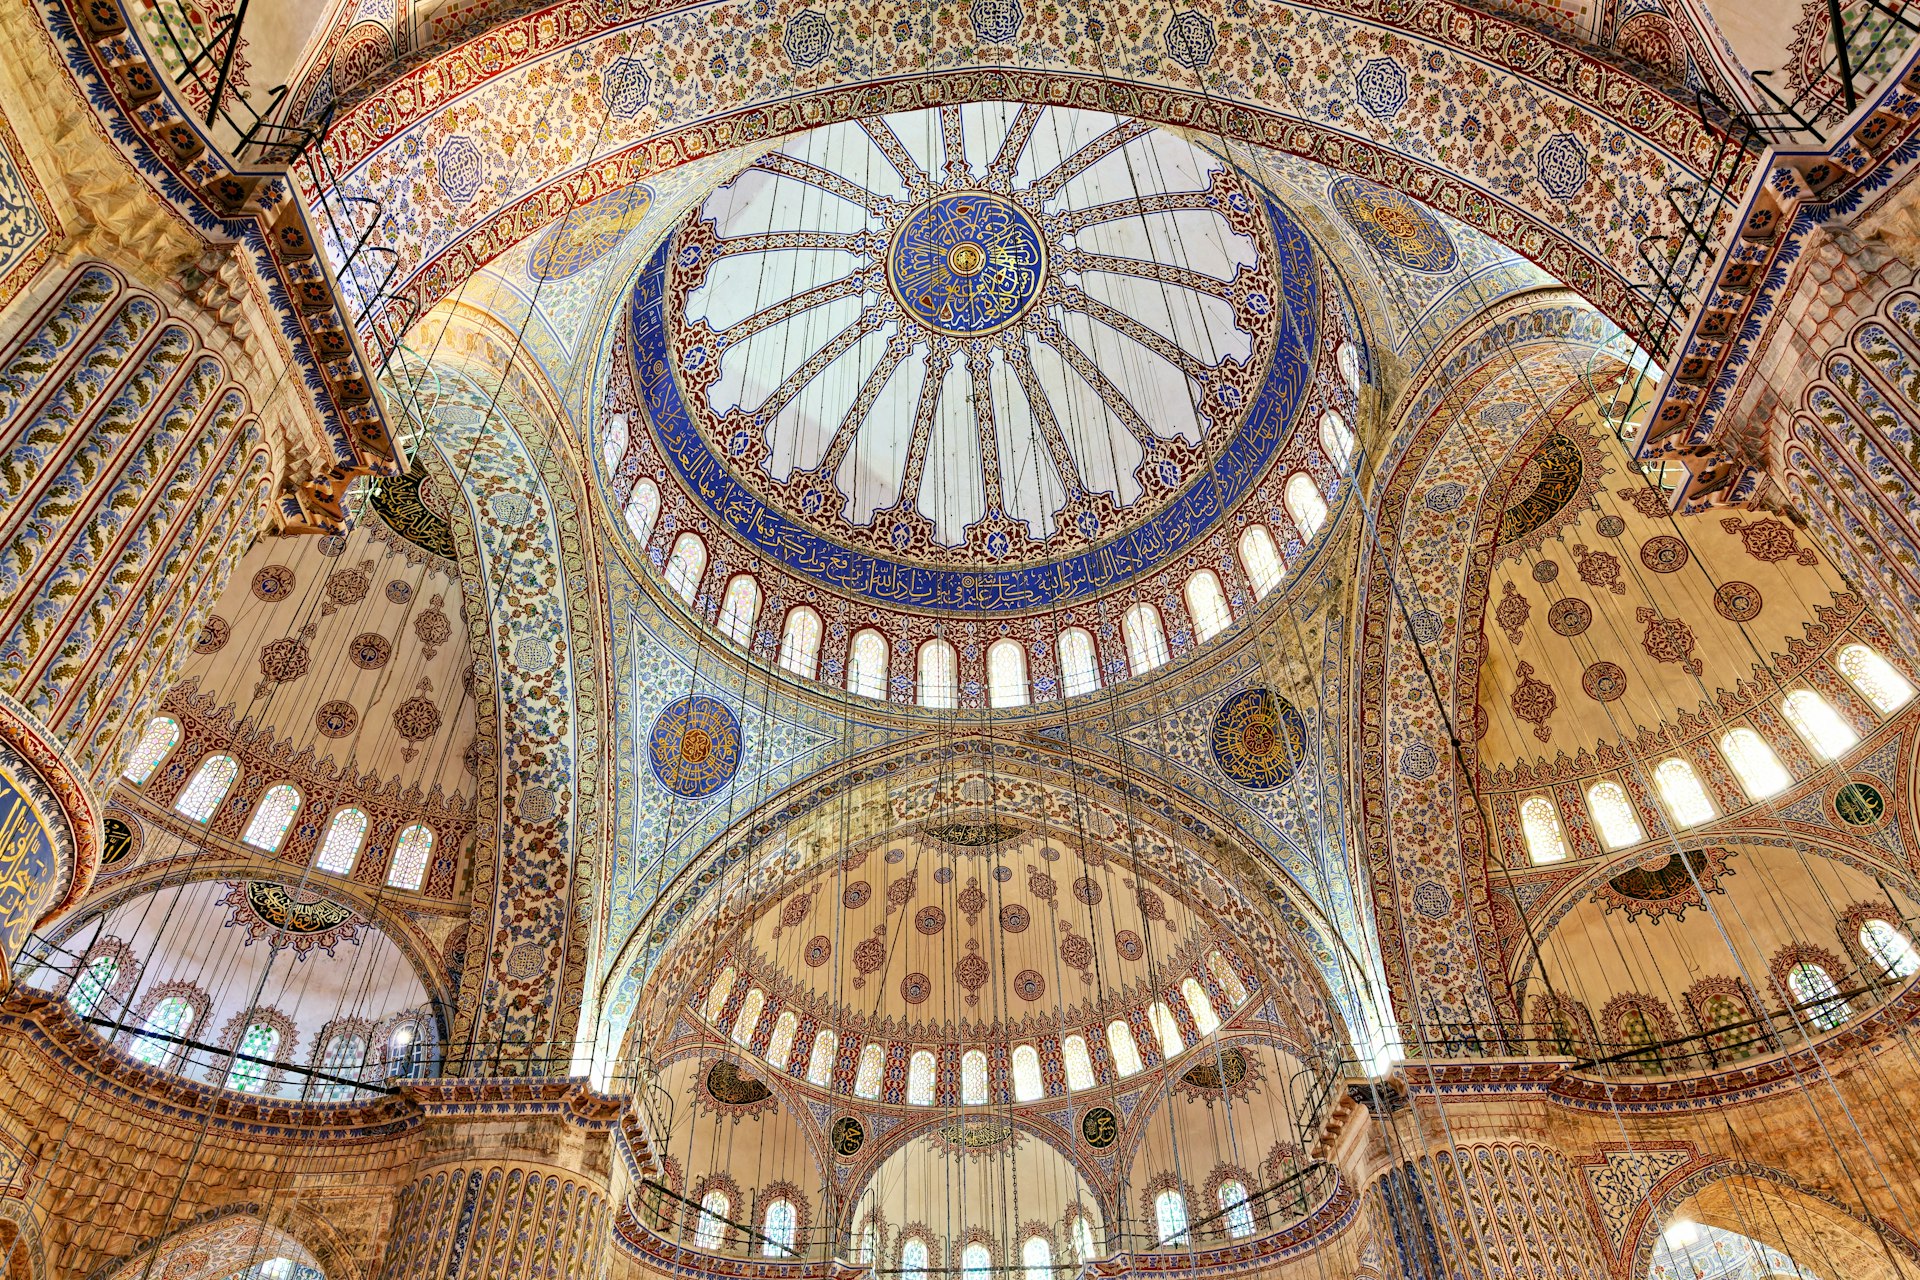 The domed ceiling inside the Sultan Ahmed Mosque (Blue Mosque), which is covered in thousands of İznik tiles.